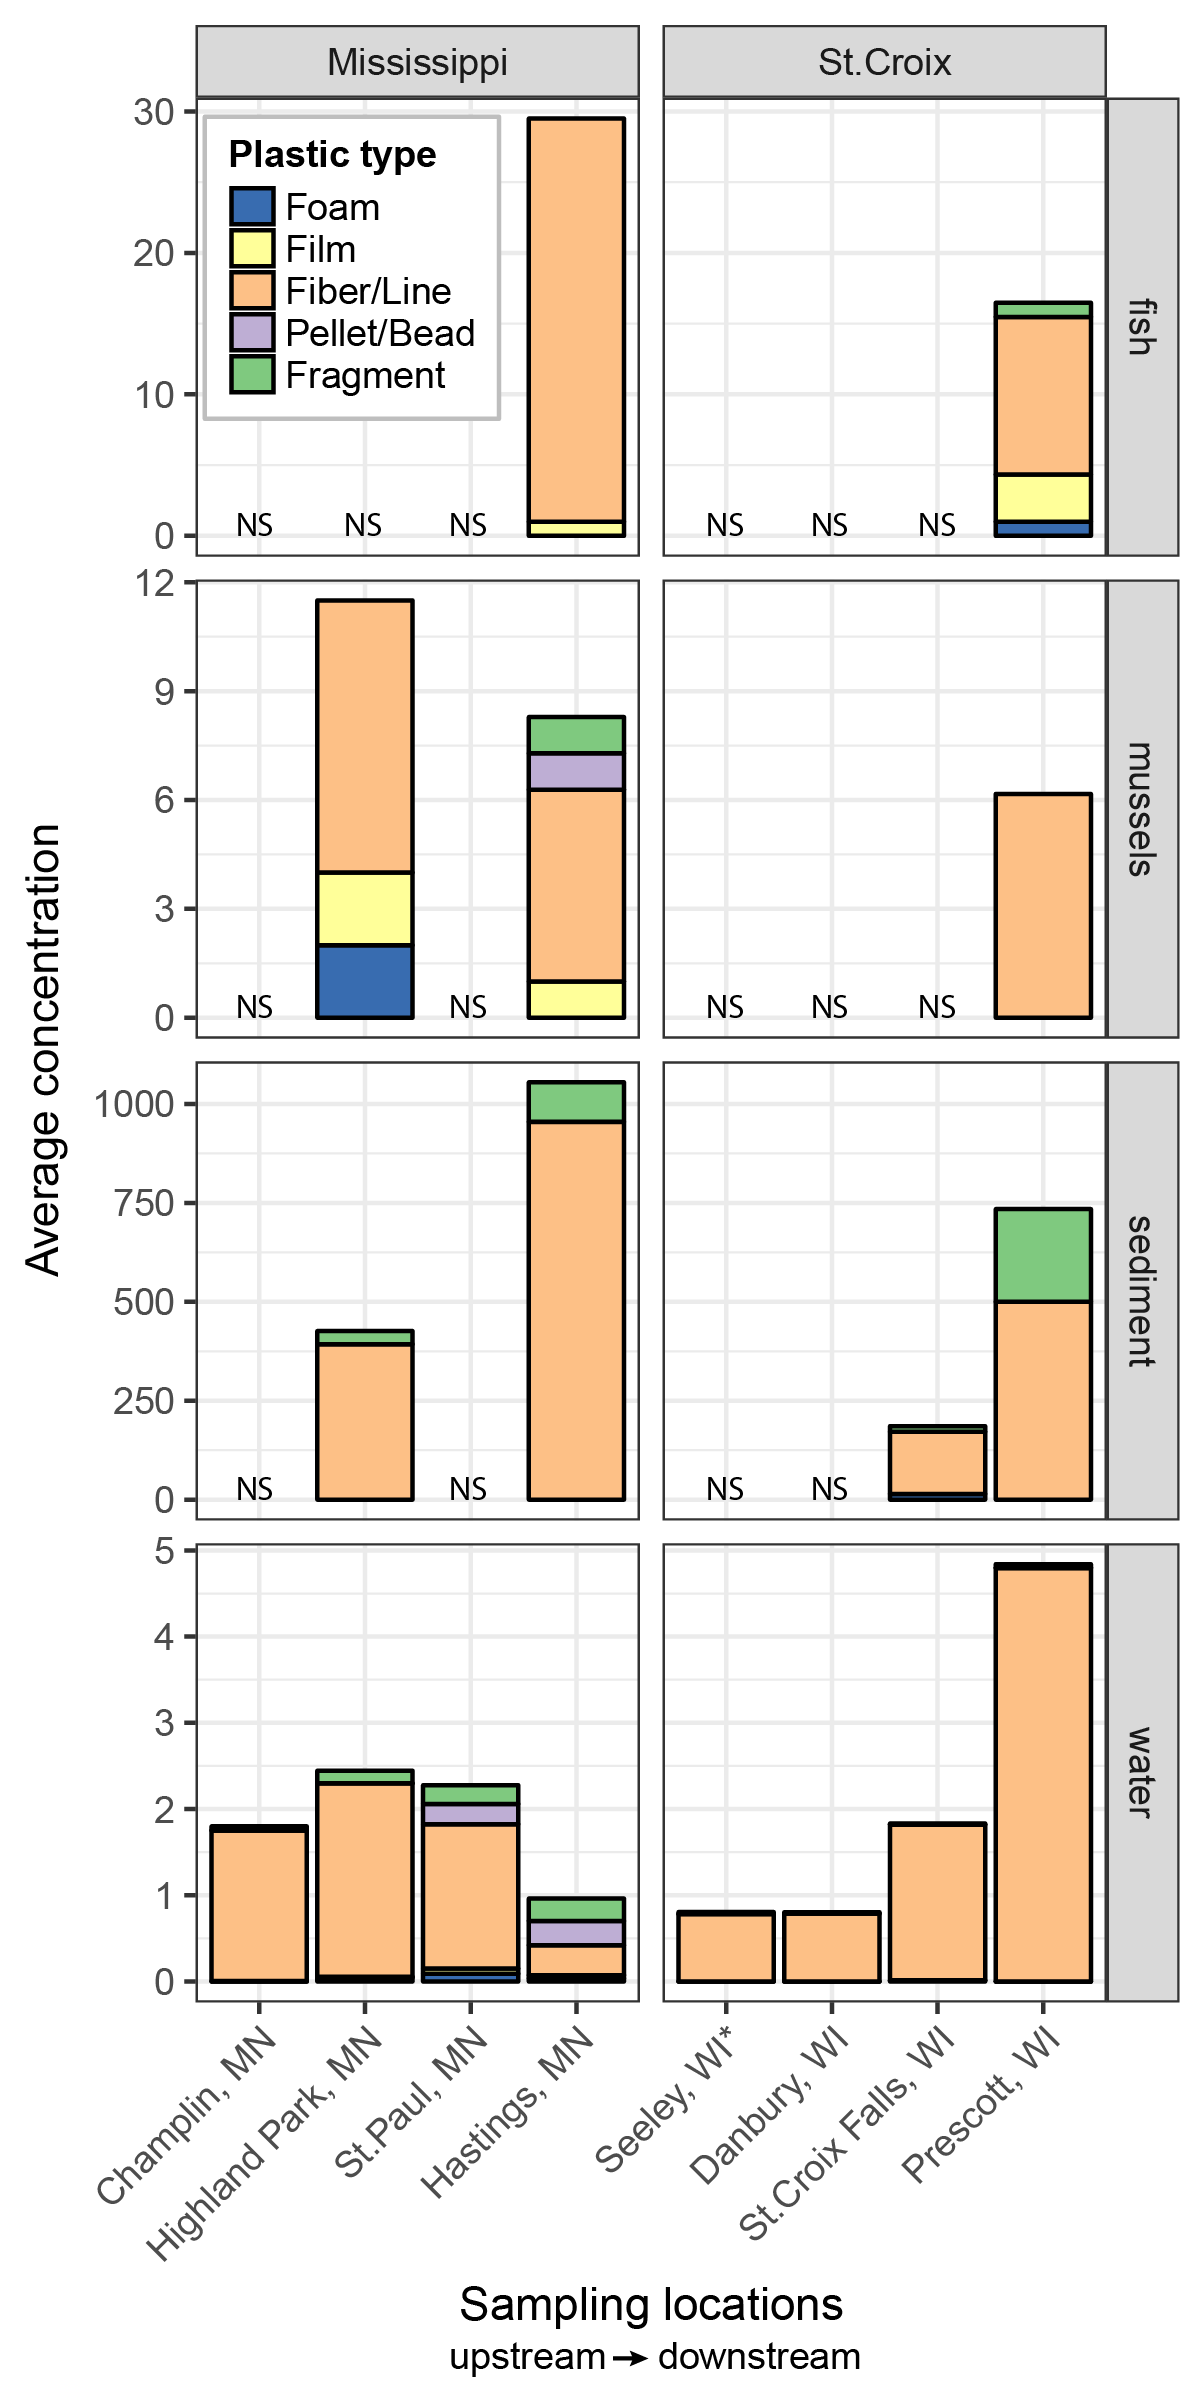 bar graphs showing microplastic concentrations by sample site